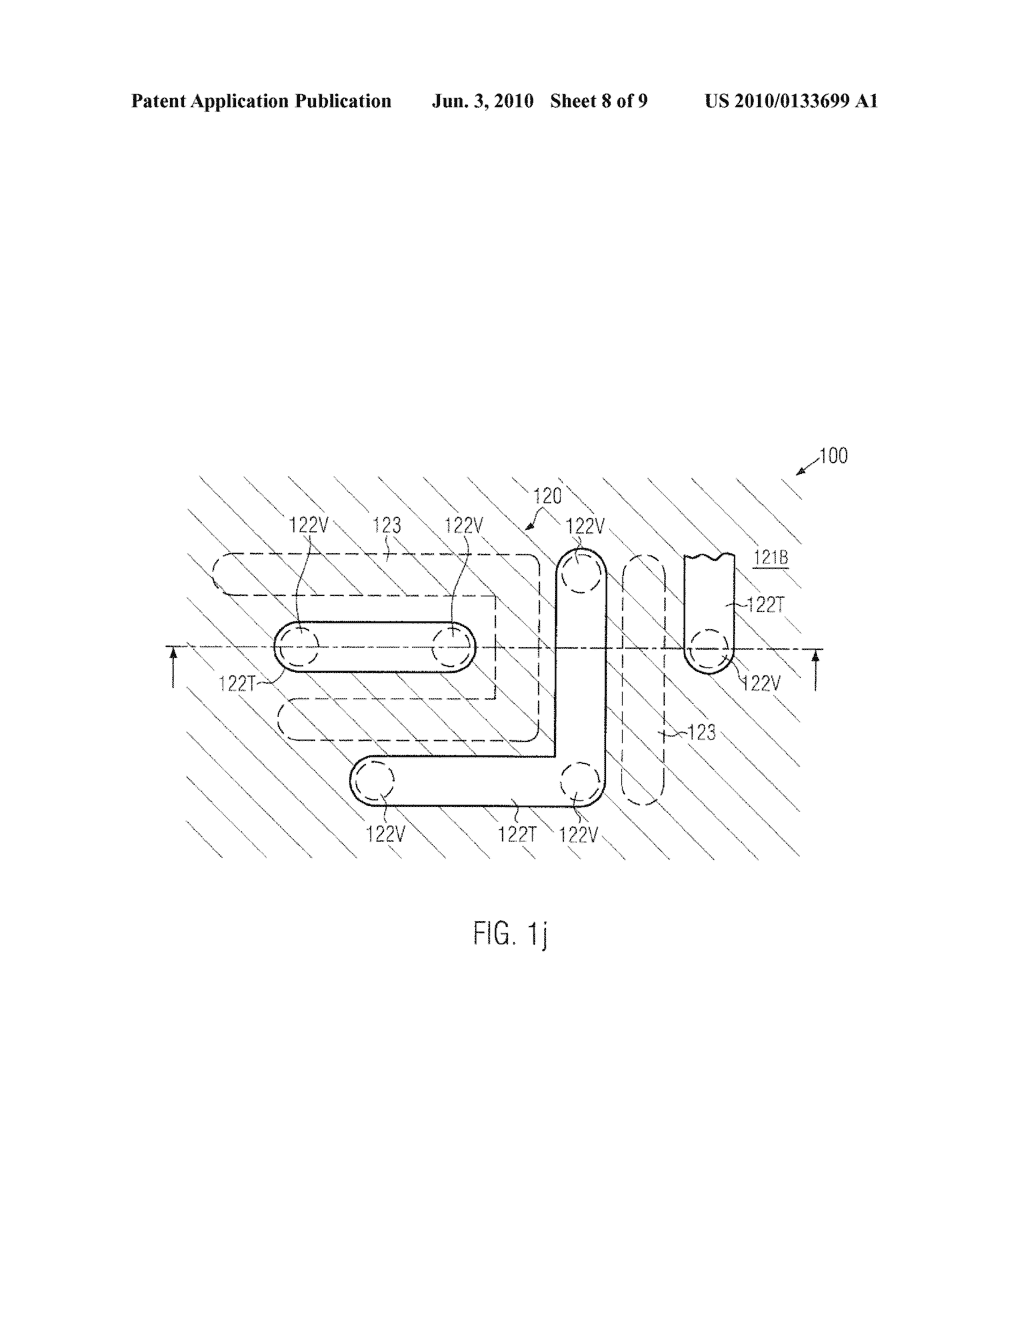 MICROSTRUCTURE DEVICE INCLUDING A METALLIZATION STRUCTURE WITH AIR GAPS FORMED COMMONLY WITH VIAS - diagram, schematic, and image 09